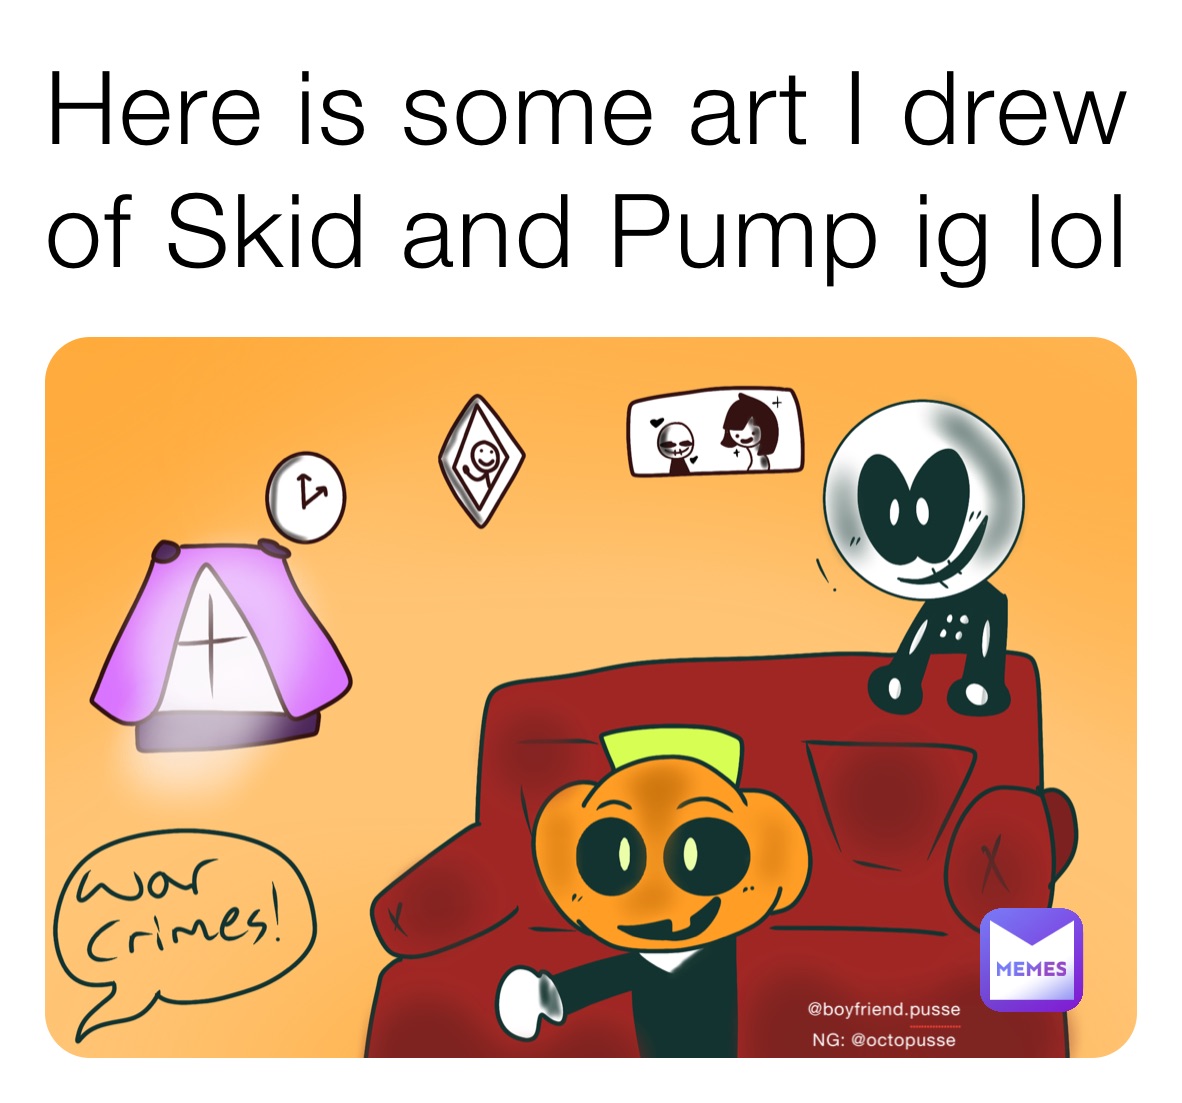 Here is some art I drew of Skid and Pump ig lol